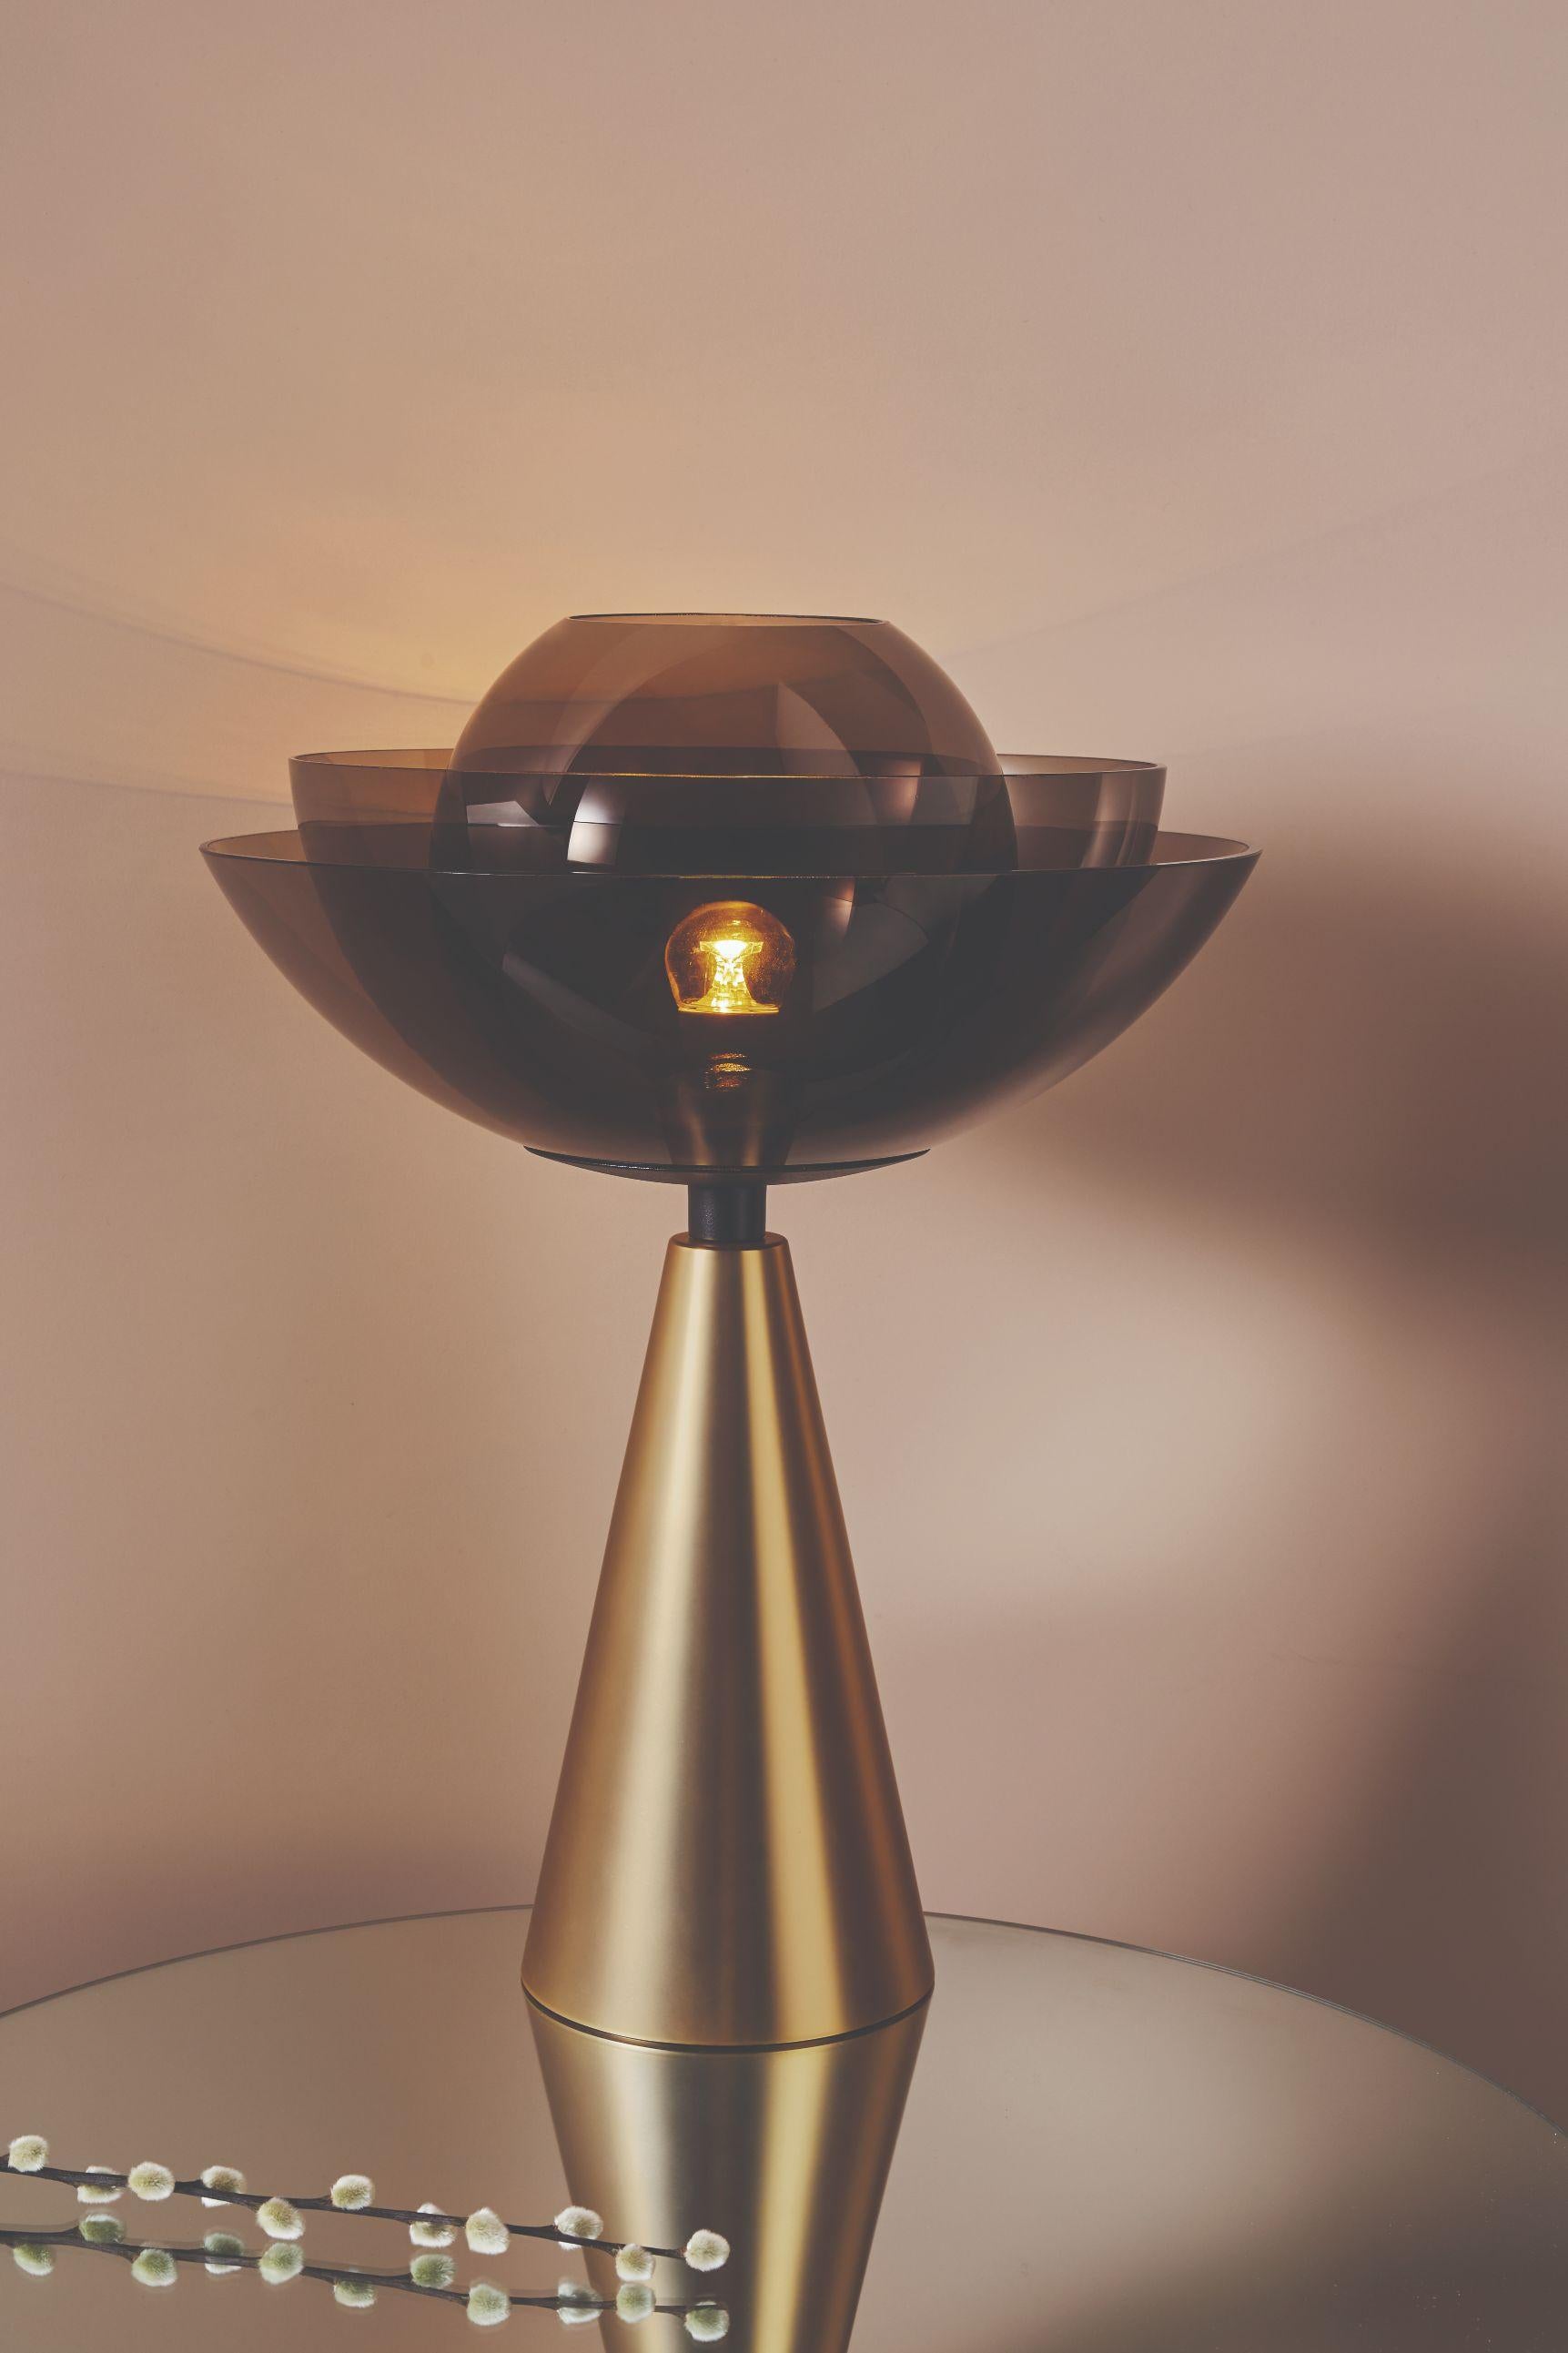 Lotus table lamp by Mason Editions
Dimensions: 36 x 36 x 48 cm
Materials: Brown glass and metal

With its fascinating shape and heady scent, for many Asian cultures, the lotus flower symbolizes elegance,
beauty, perfection, purity, and grace.
The